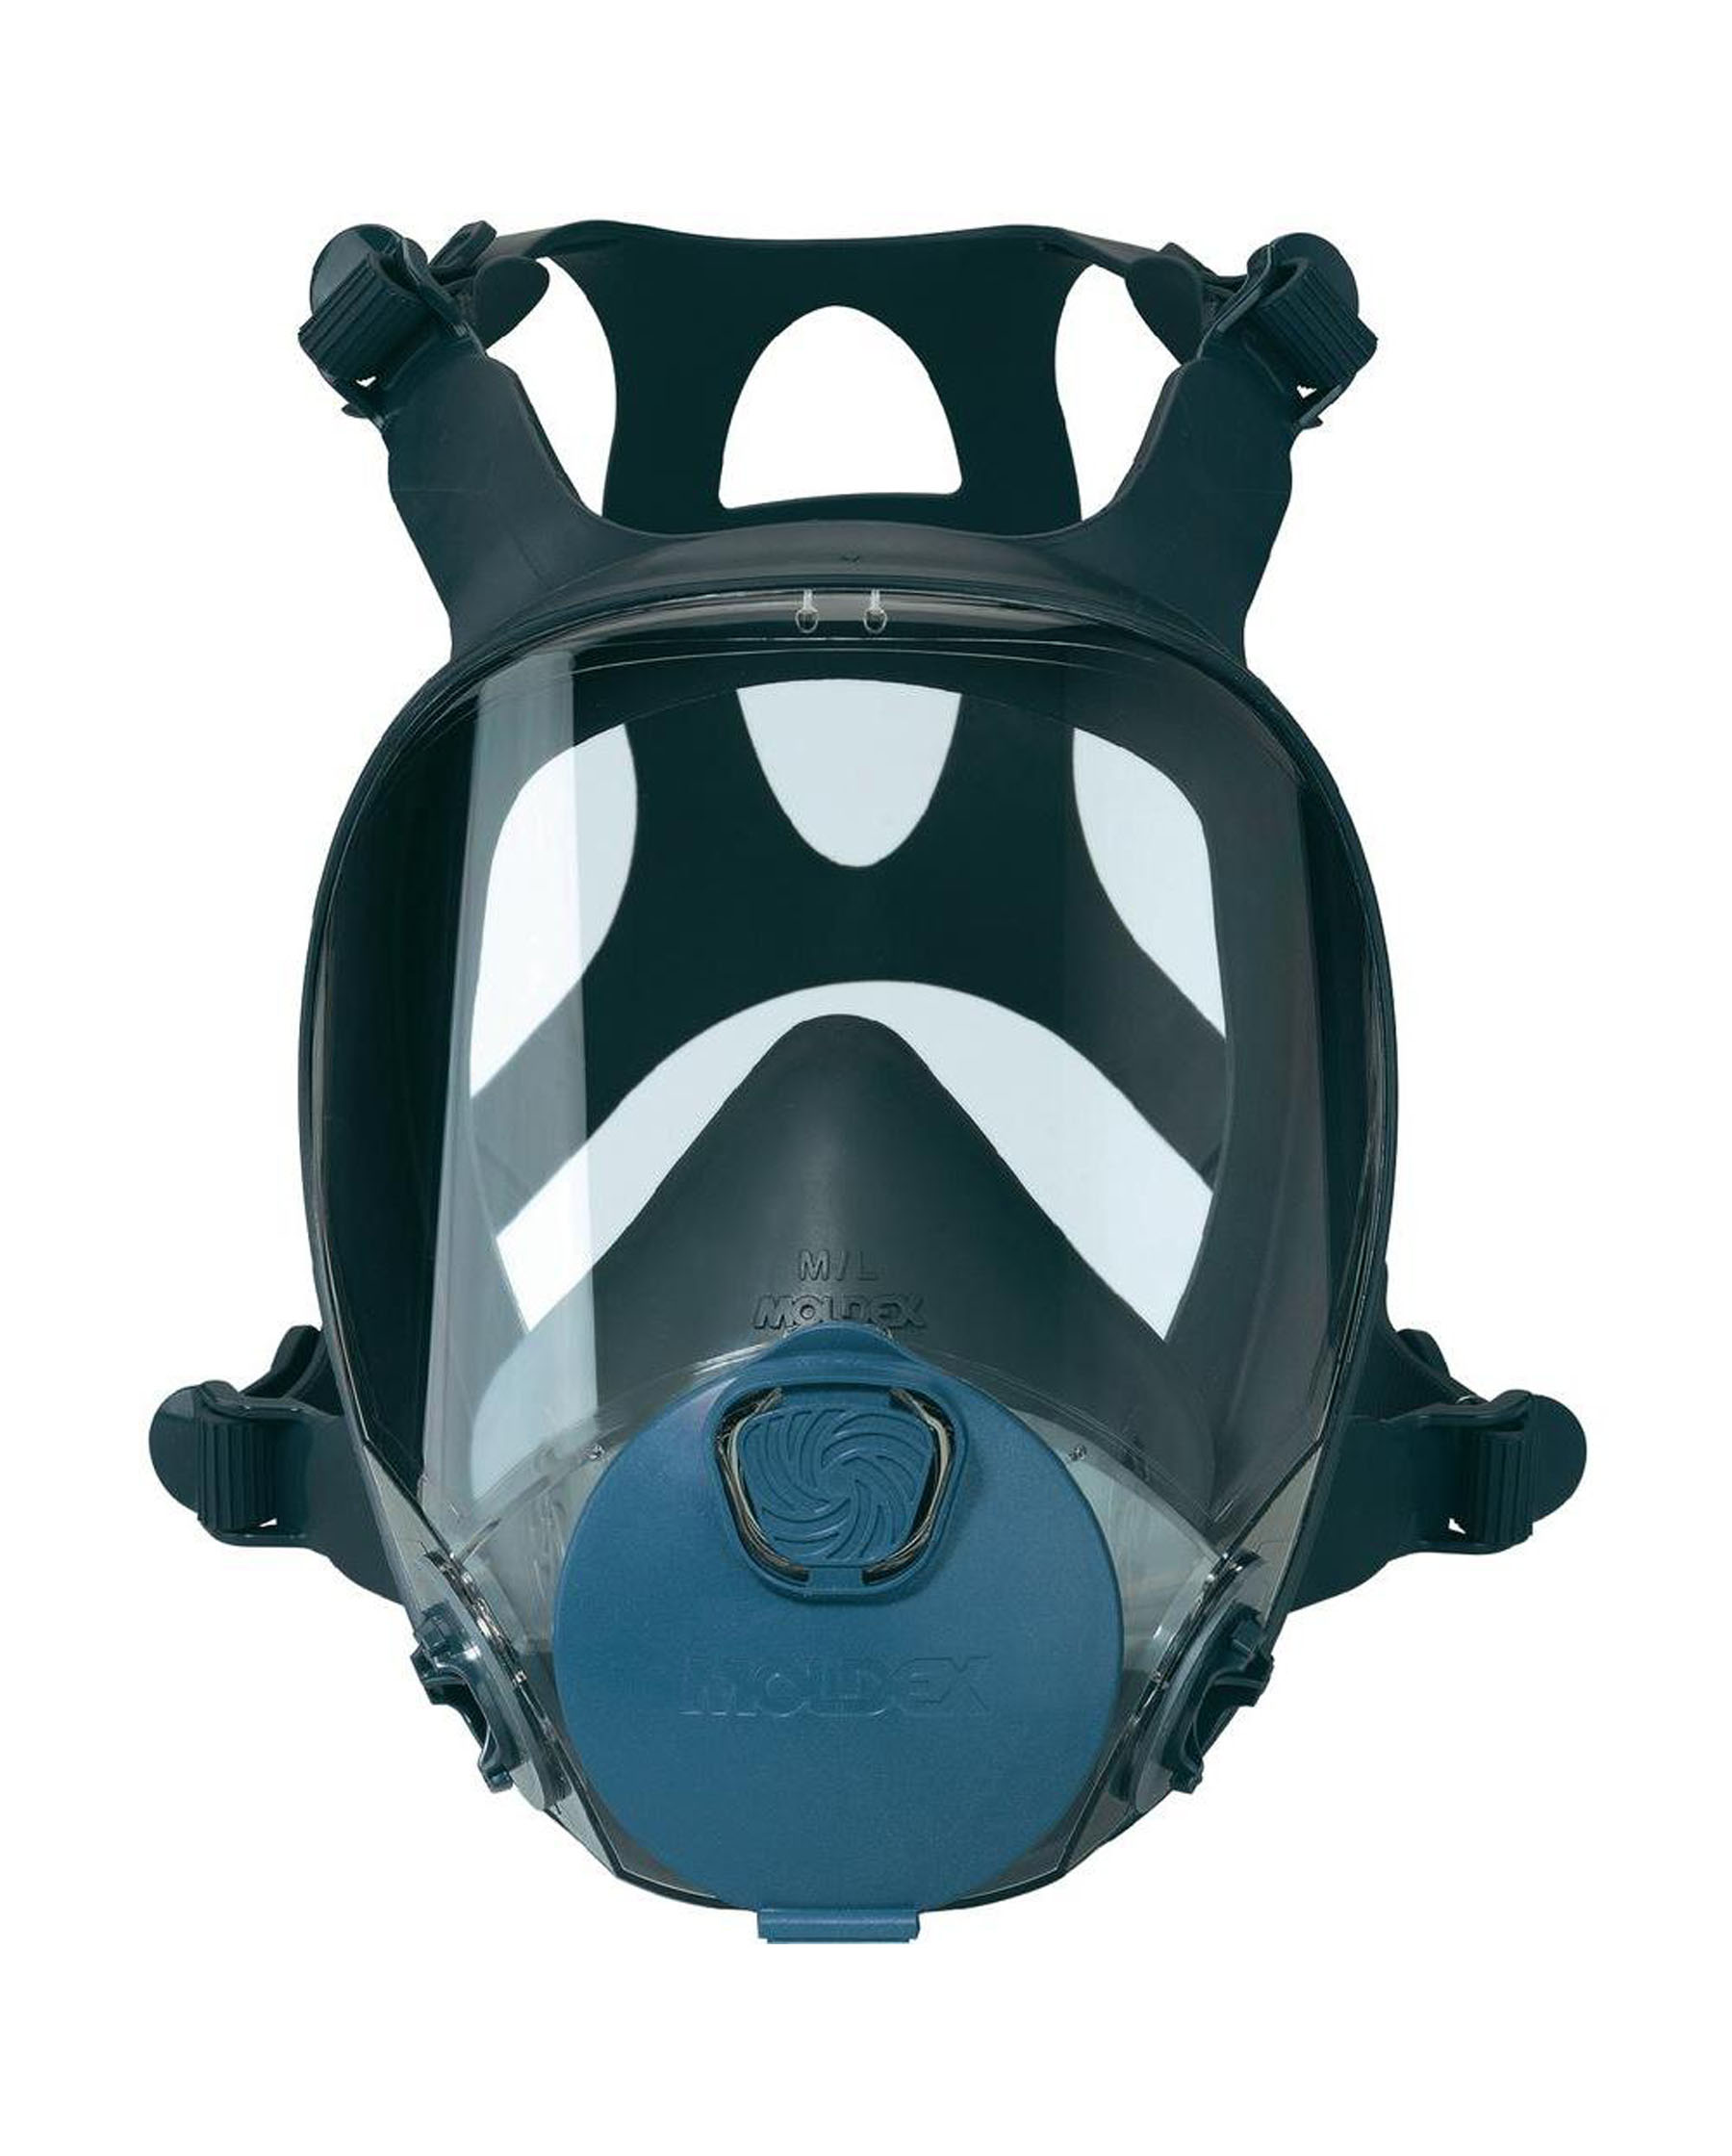 Moldex 9000 Series Full Face Respirator Dust And Gas Mask Medsurge Healthcare Limited 9542